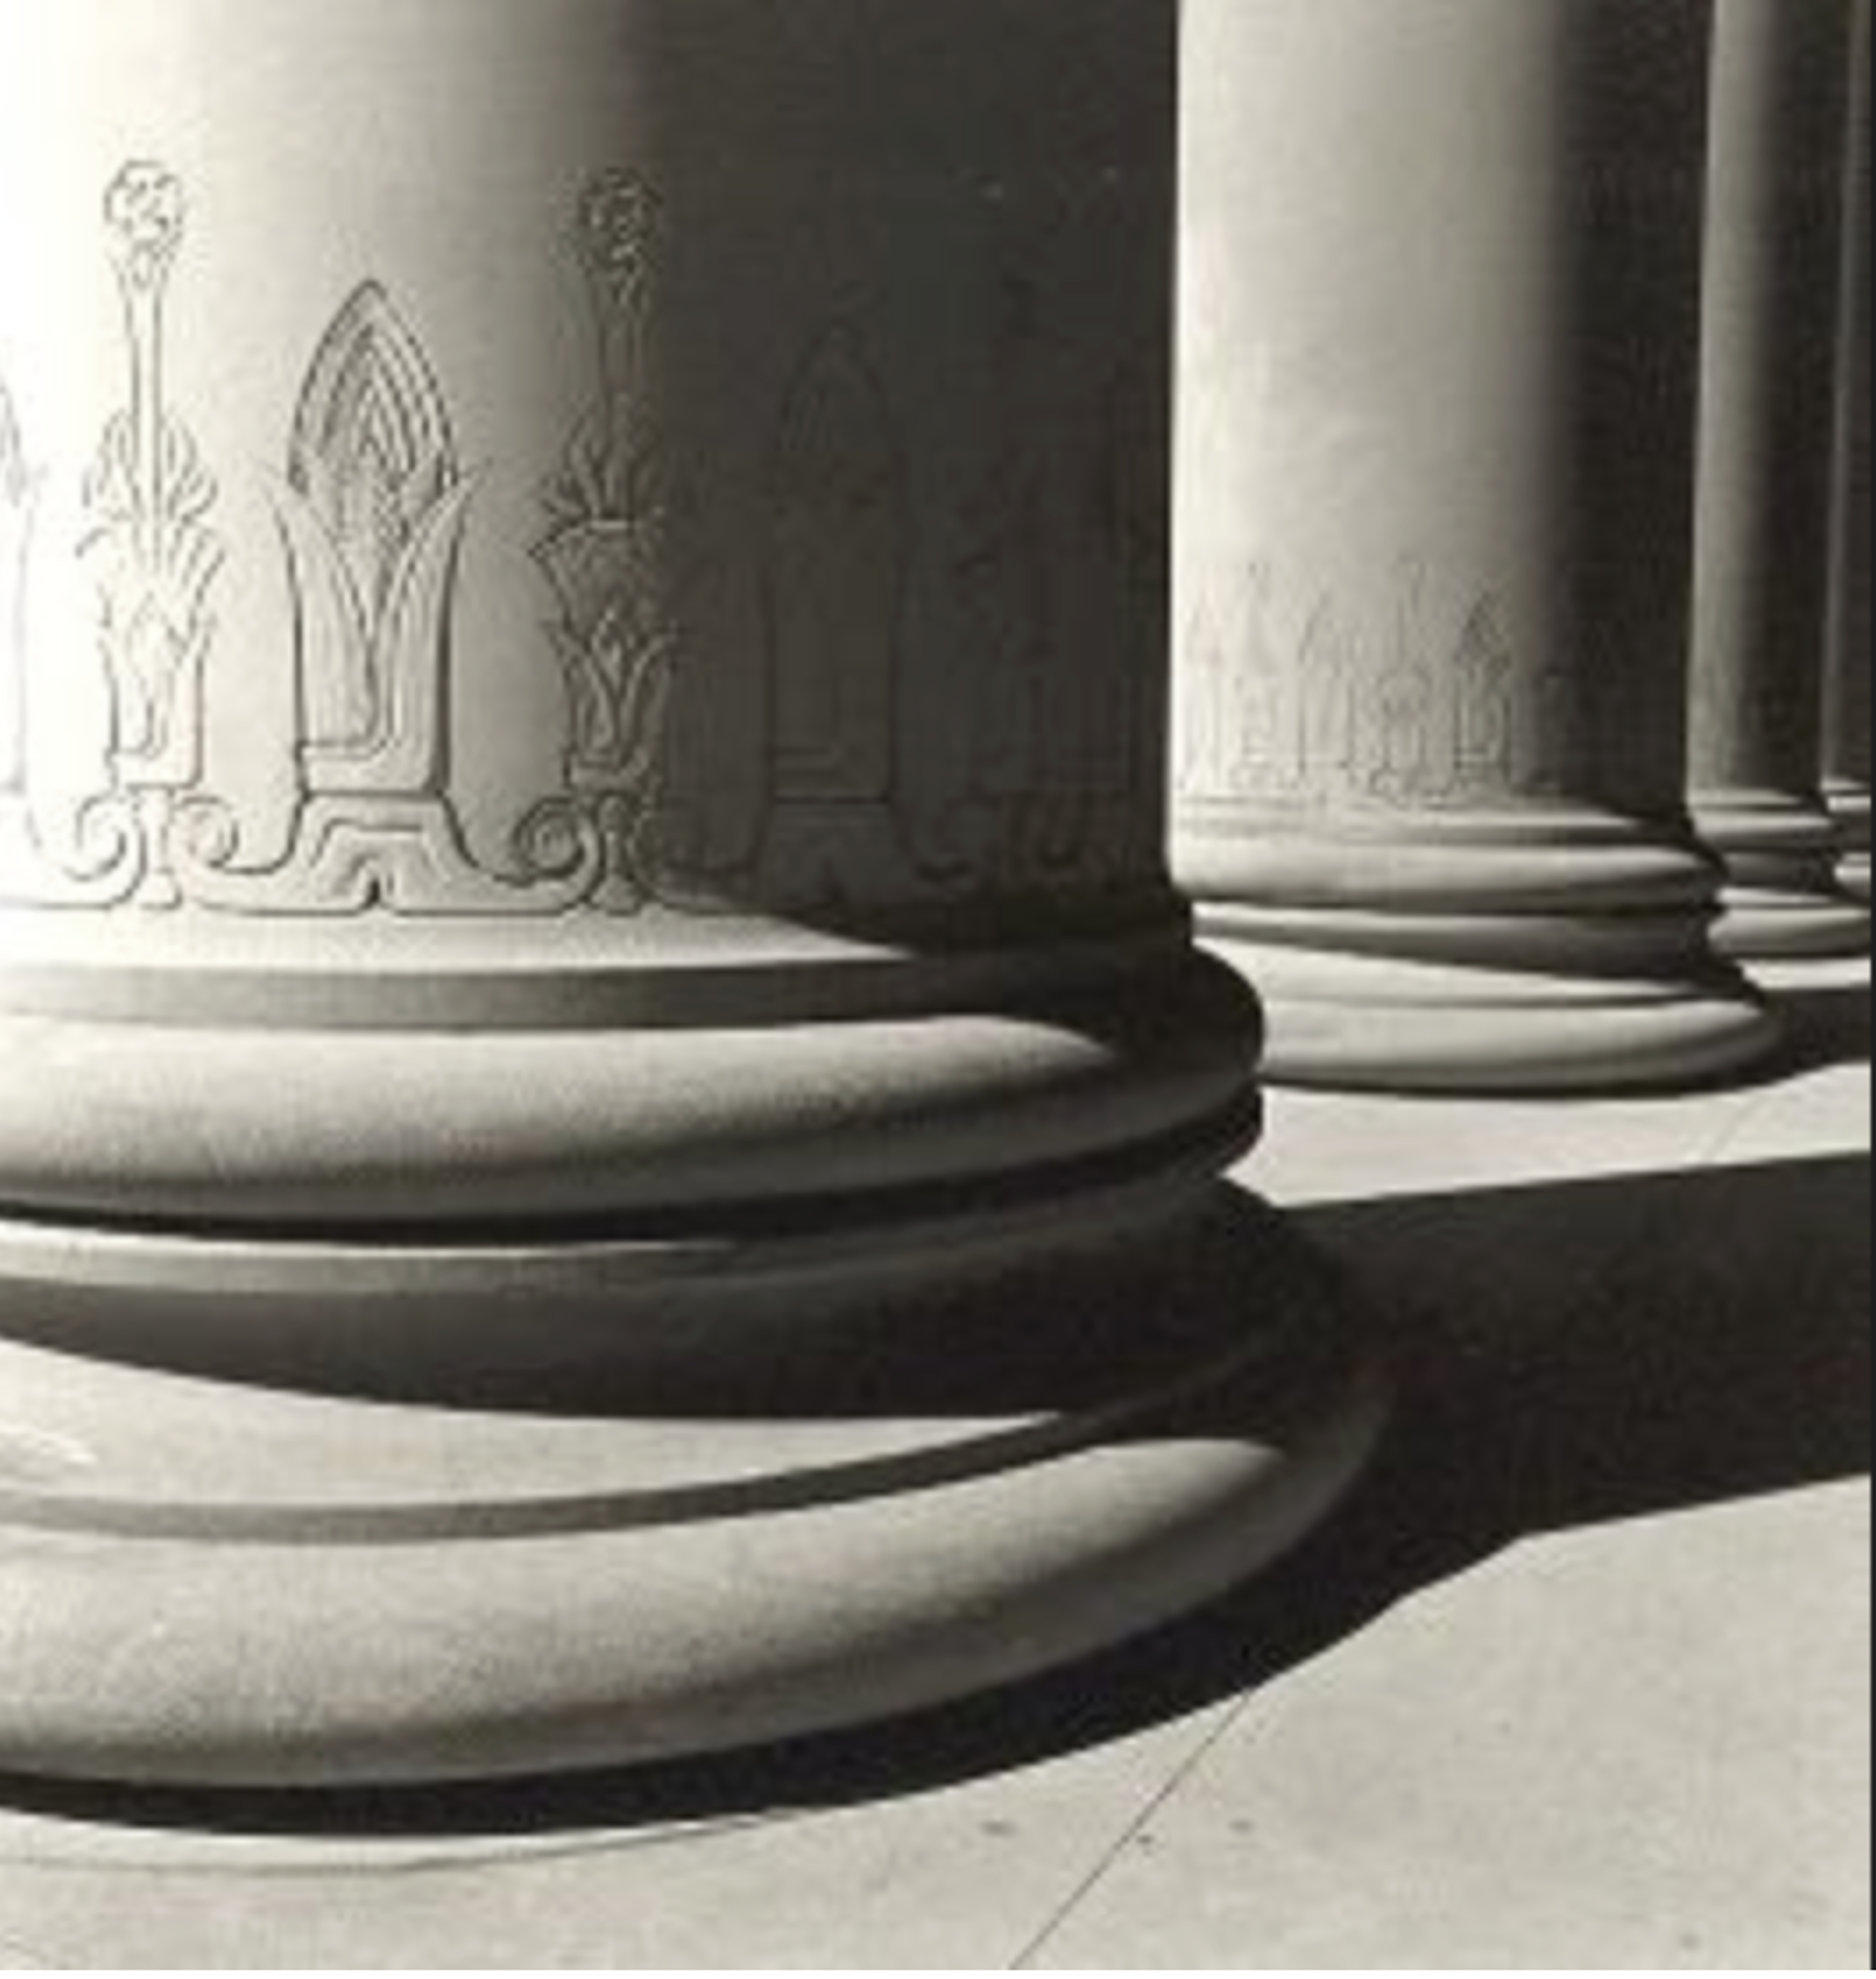 Columns & Shadows Nelson-Atkins by Mike McMullen